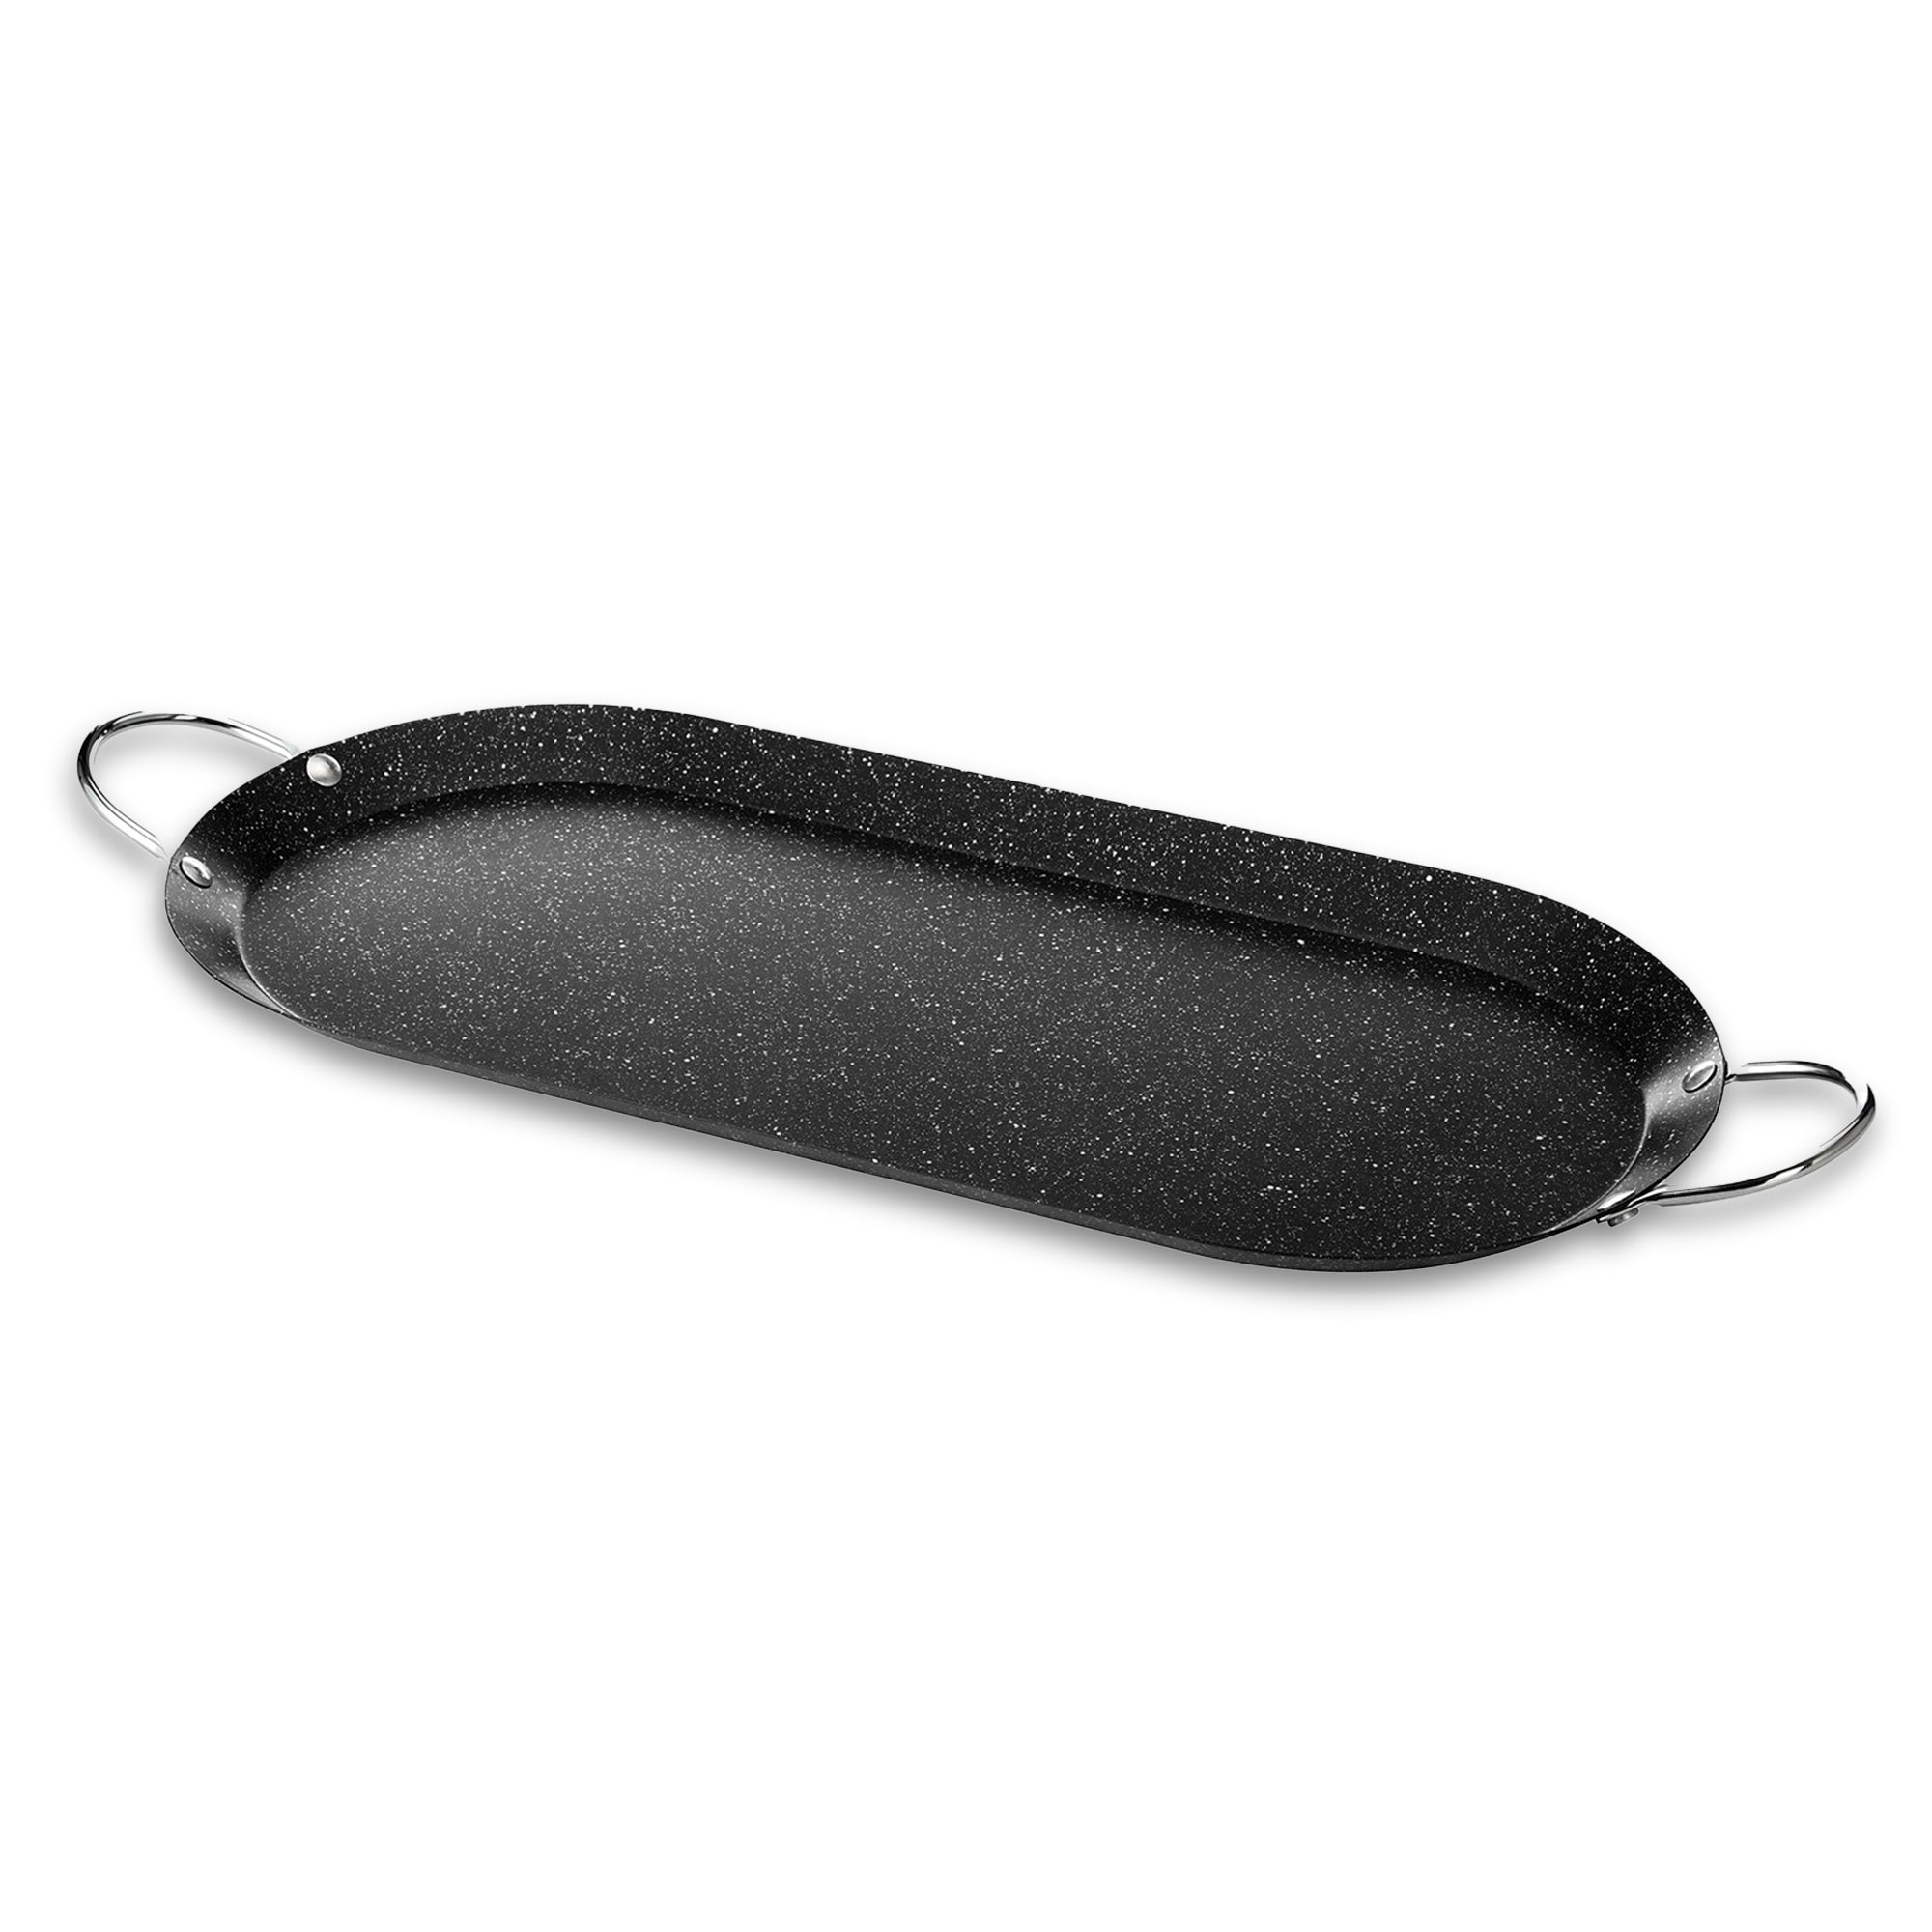 Alpine Cuisine Nonstick Oval Comal 17.5x8-Inch - Black Carbon Steel  Tortilla Comal with Single Handle - Durable, Heavy Duty Comal for Cooking 